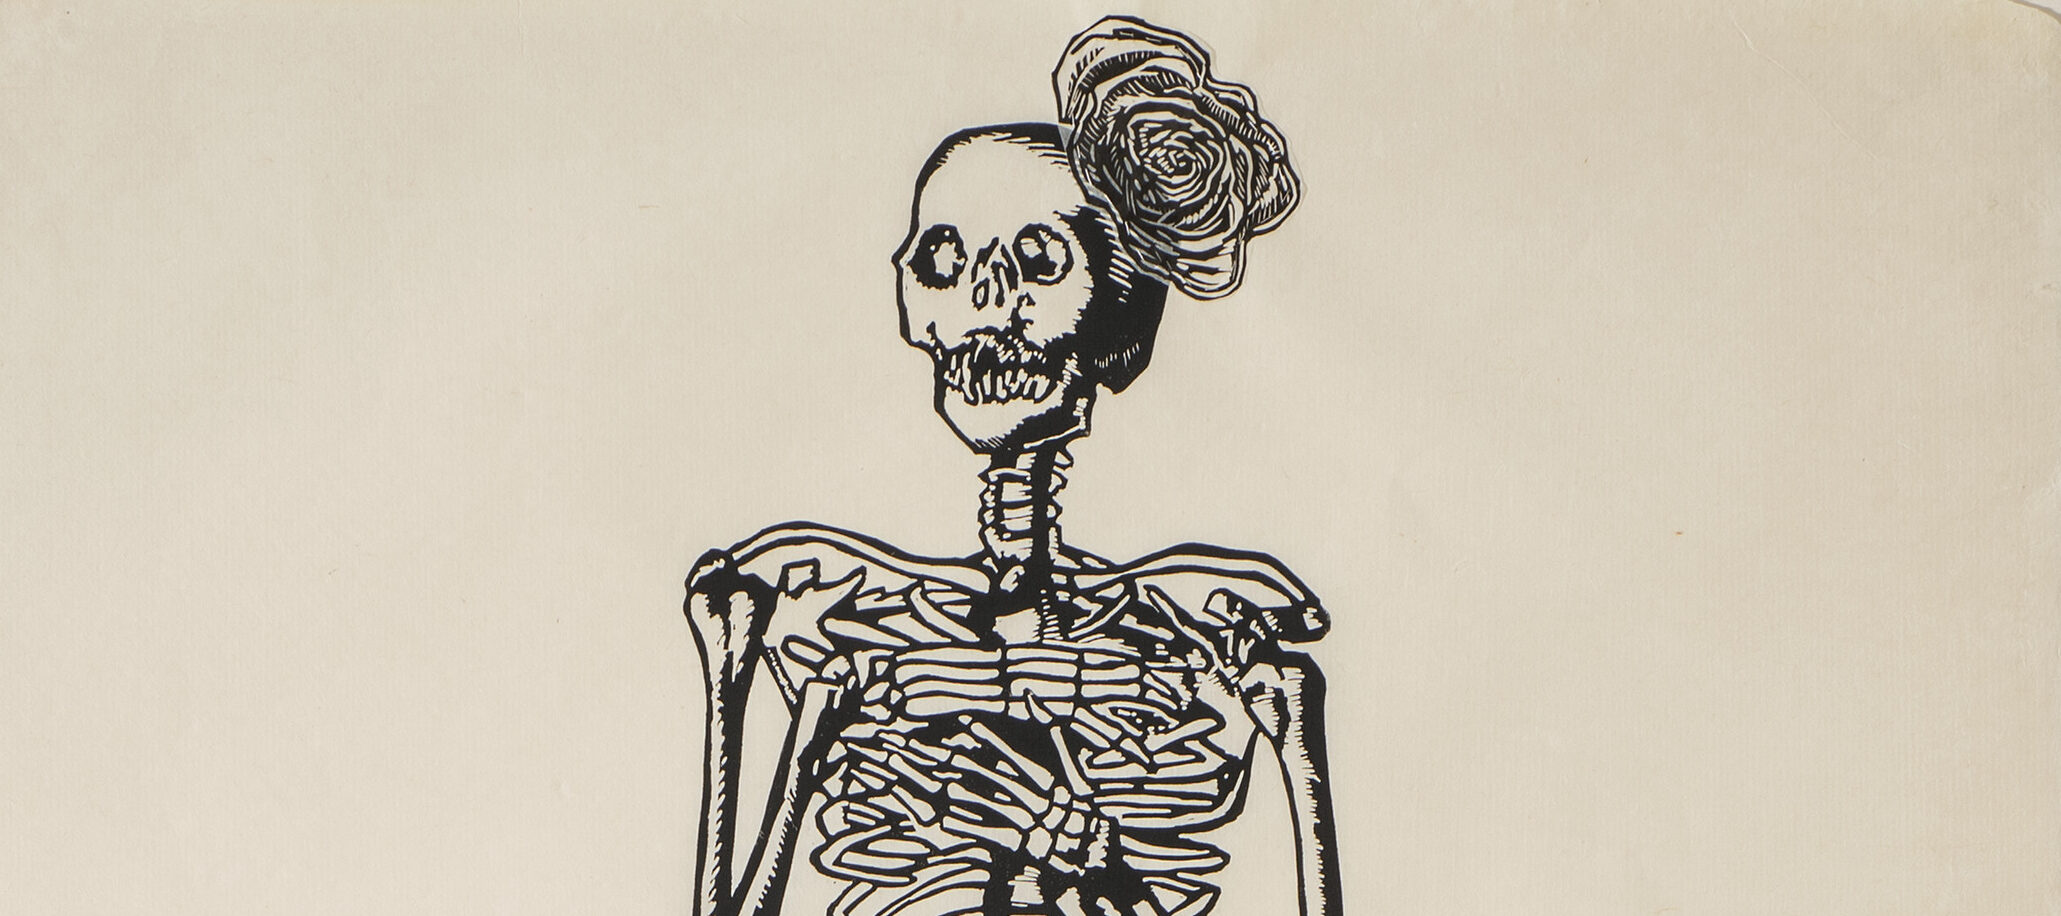 A very tall and narrow, black-and-white print depicts a skeleton with folded arms and a rose fascinator perched on its head. The figure wears a collaged, three-dimensional, billowing skirt made of tissue and printed with roses.